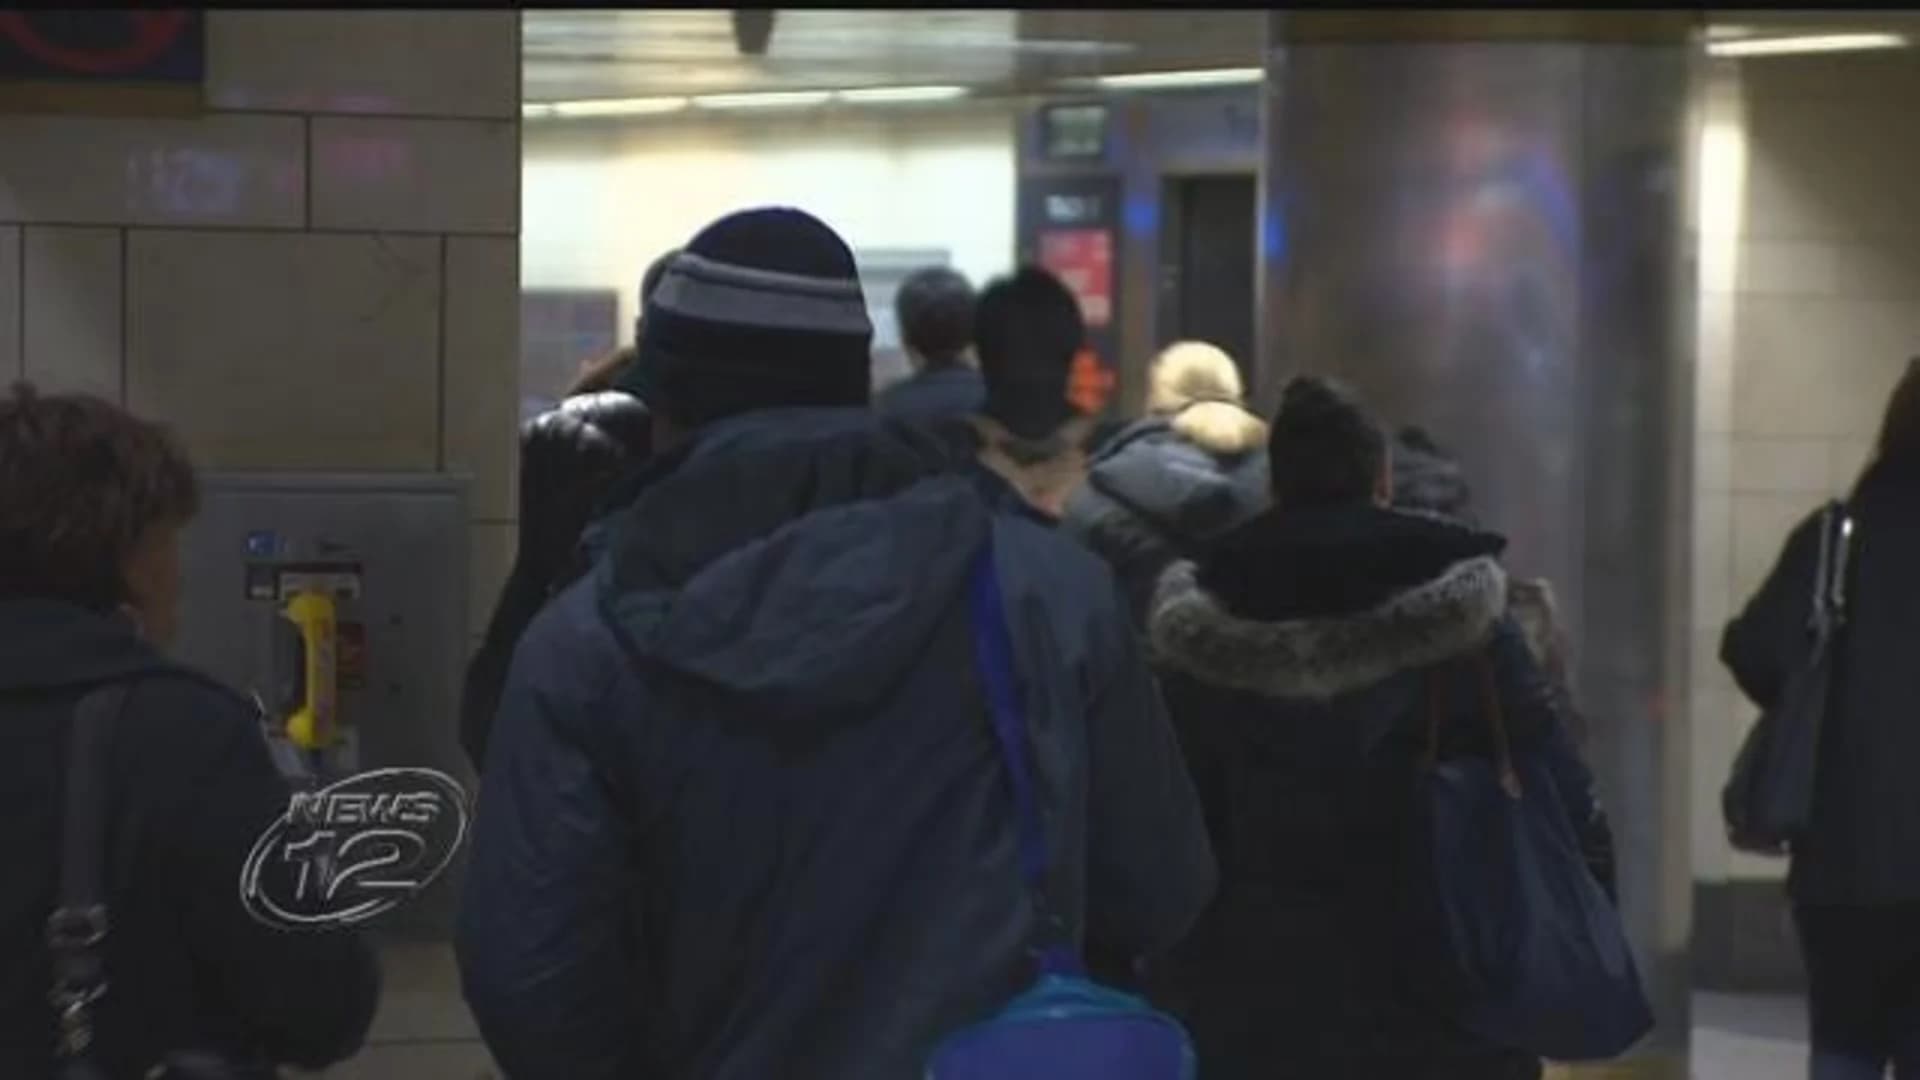 LIRR riders face service changes as new Penn Station work begins